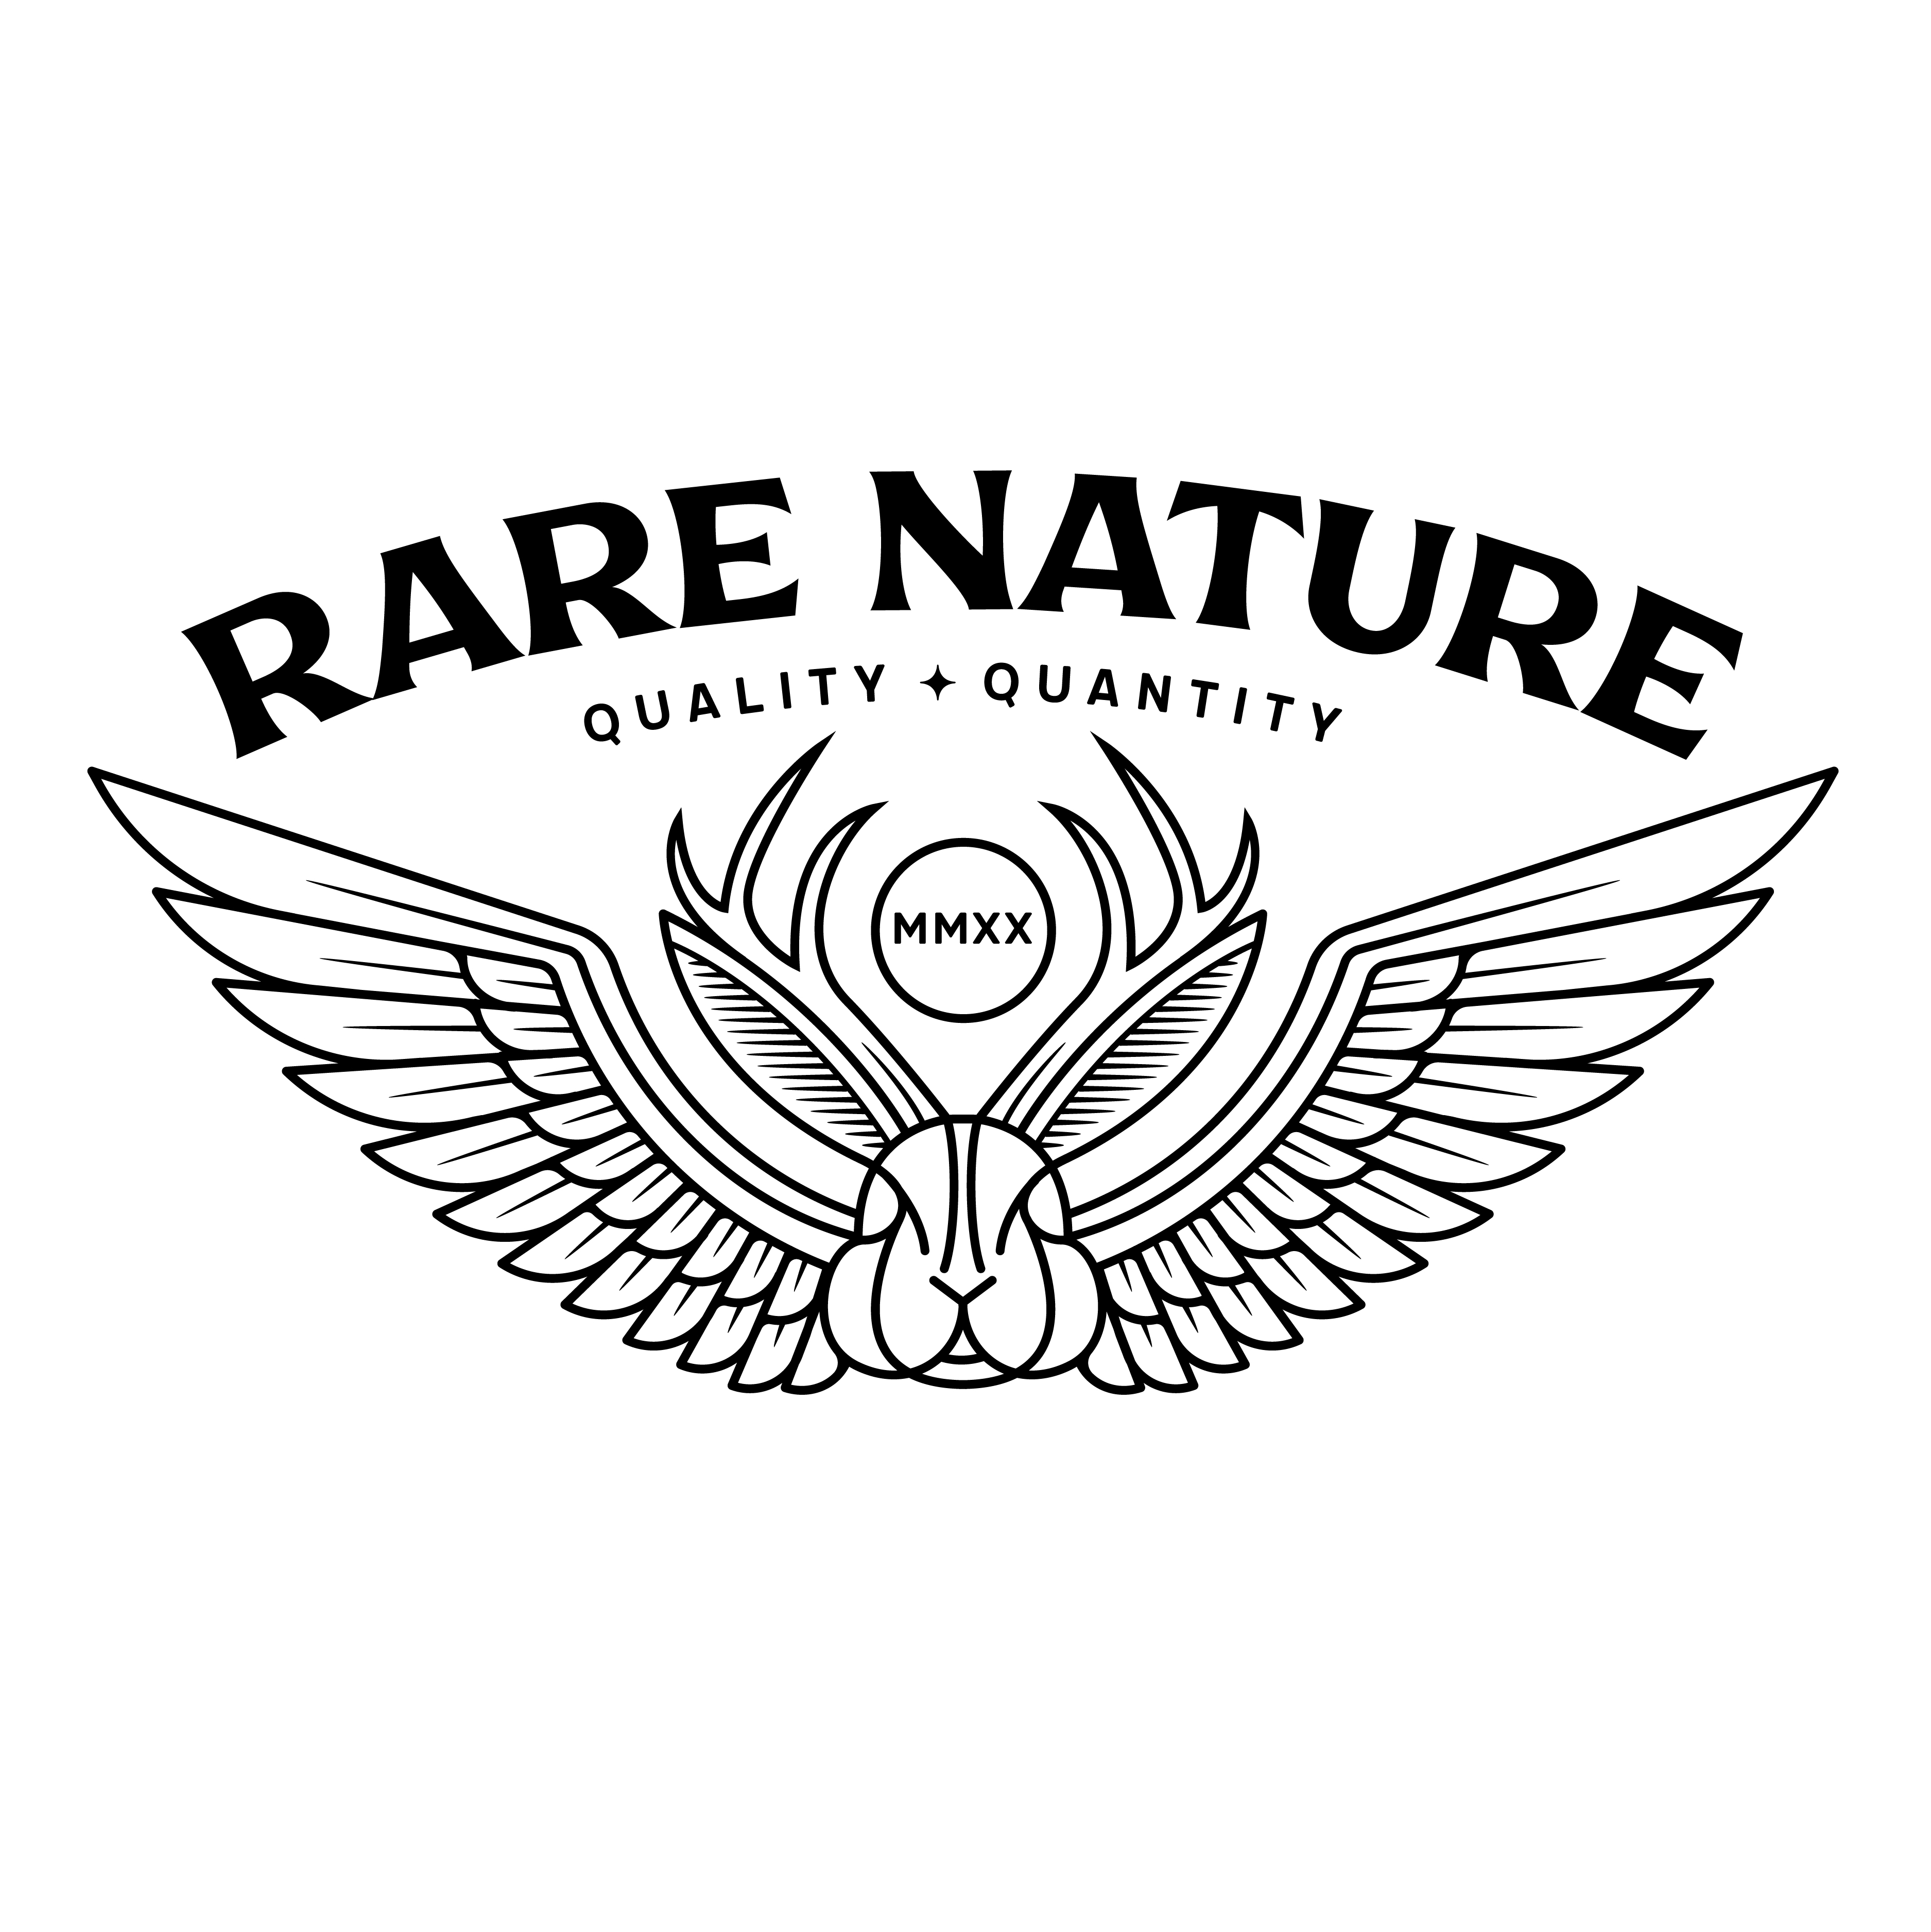 Rare Nature  logo design by logo designer Steely Works for your inspiration and for the worlds largest logo competition